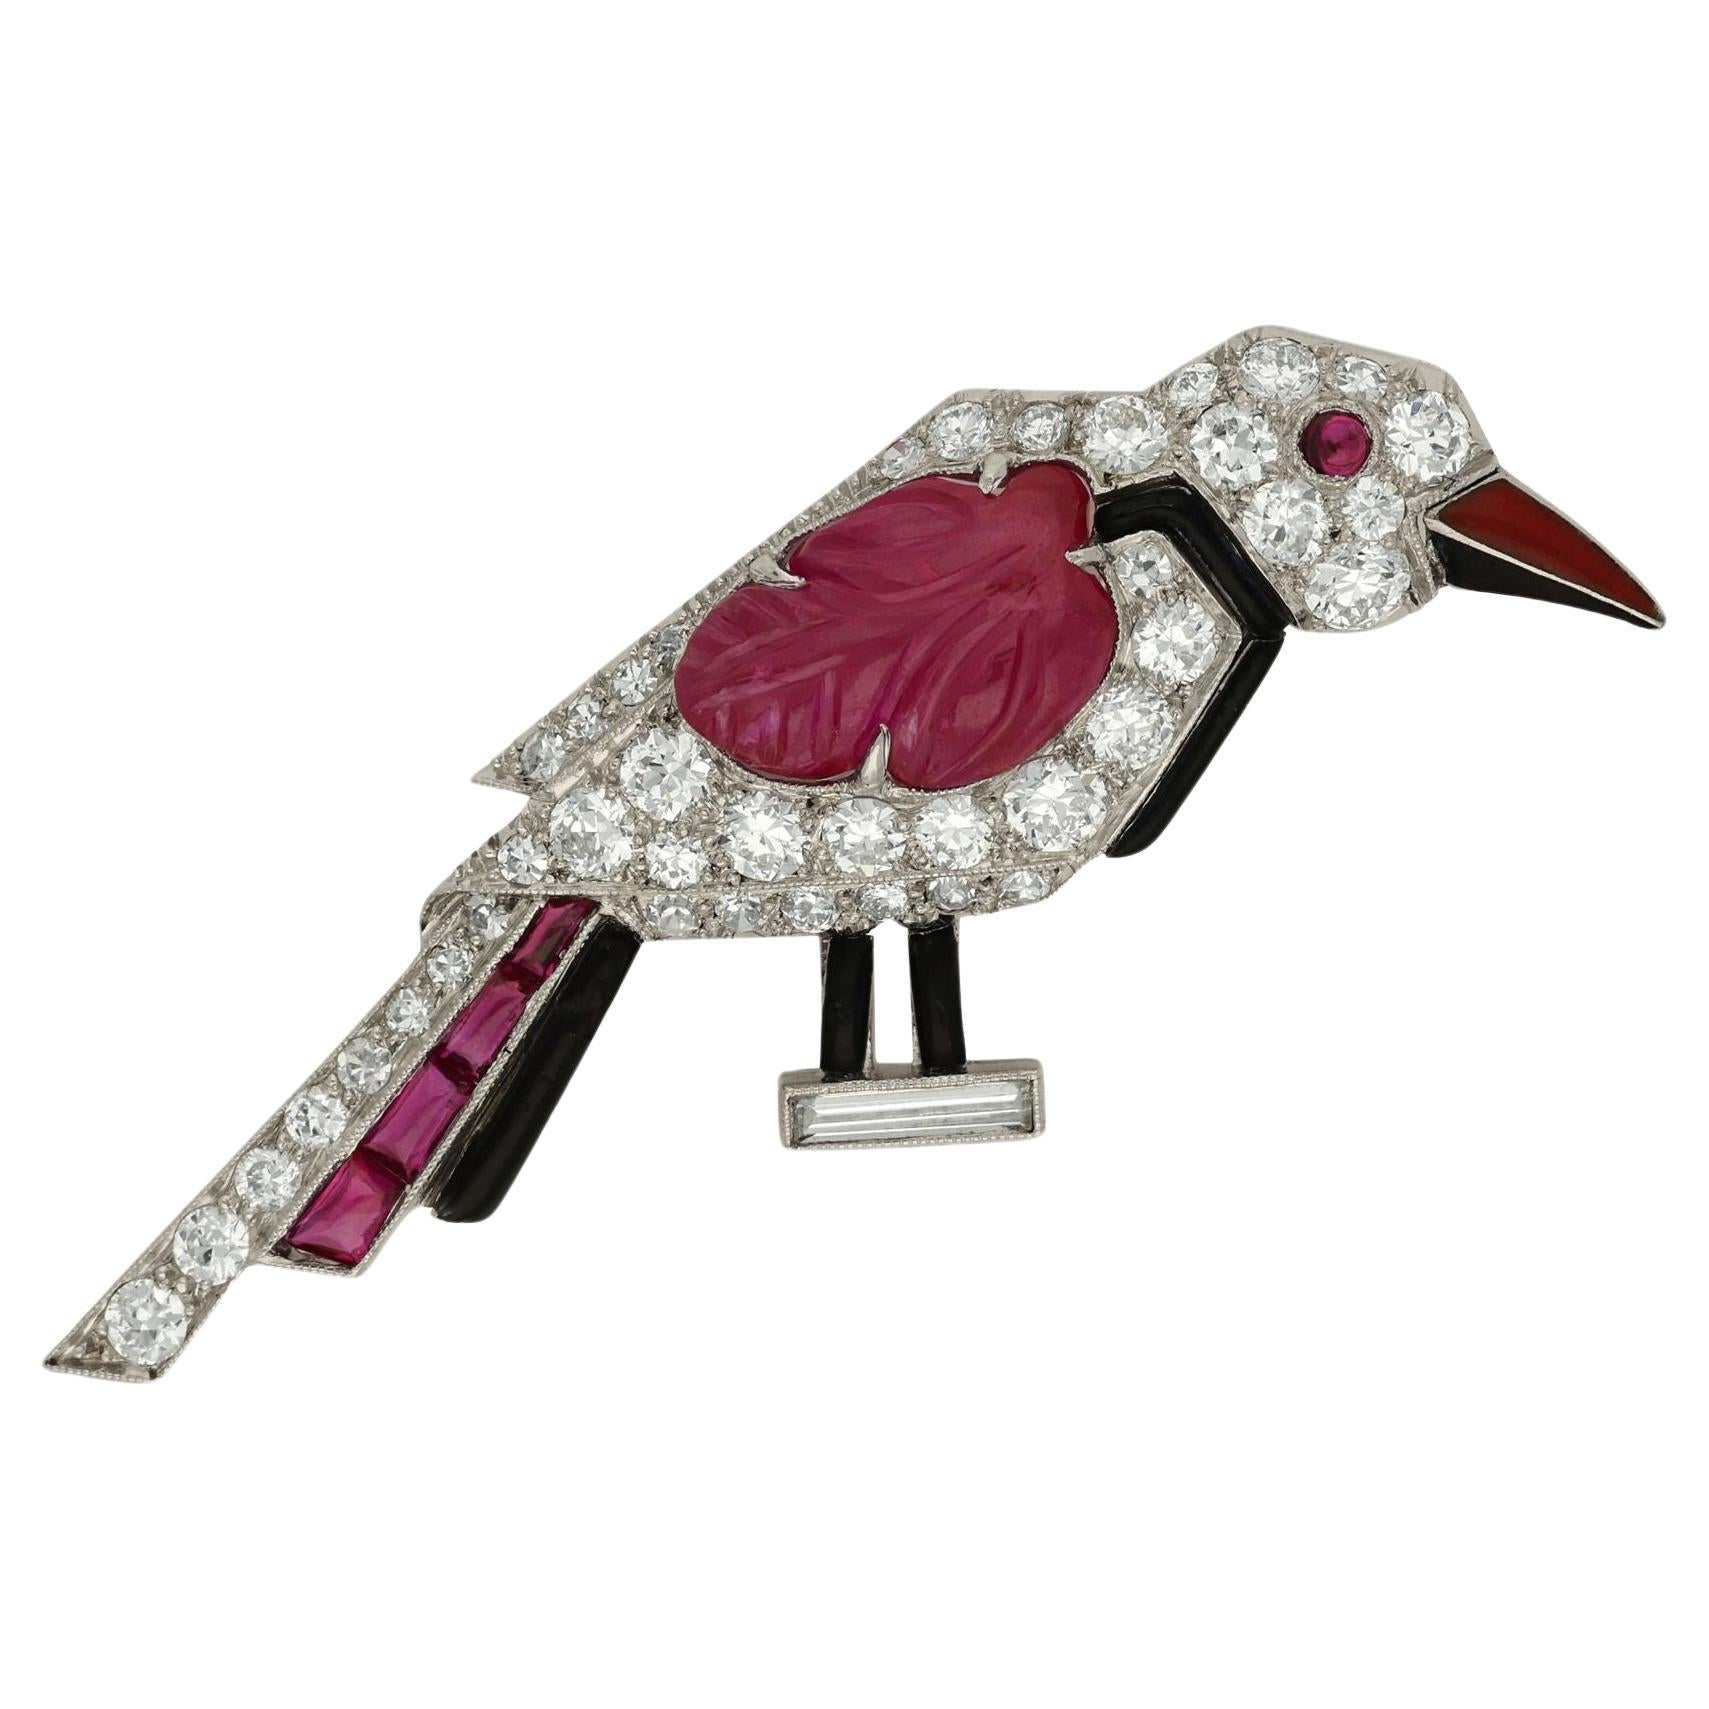 Cartier Art Deco Stylised Diamond And Carved Ruby Bird Brooch Circa 1925 London For Sale